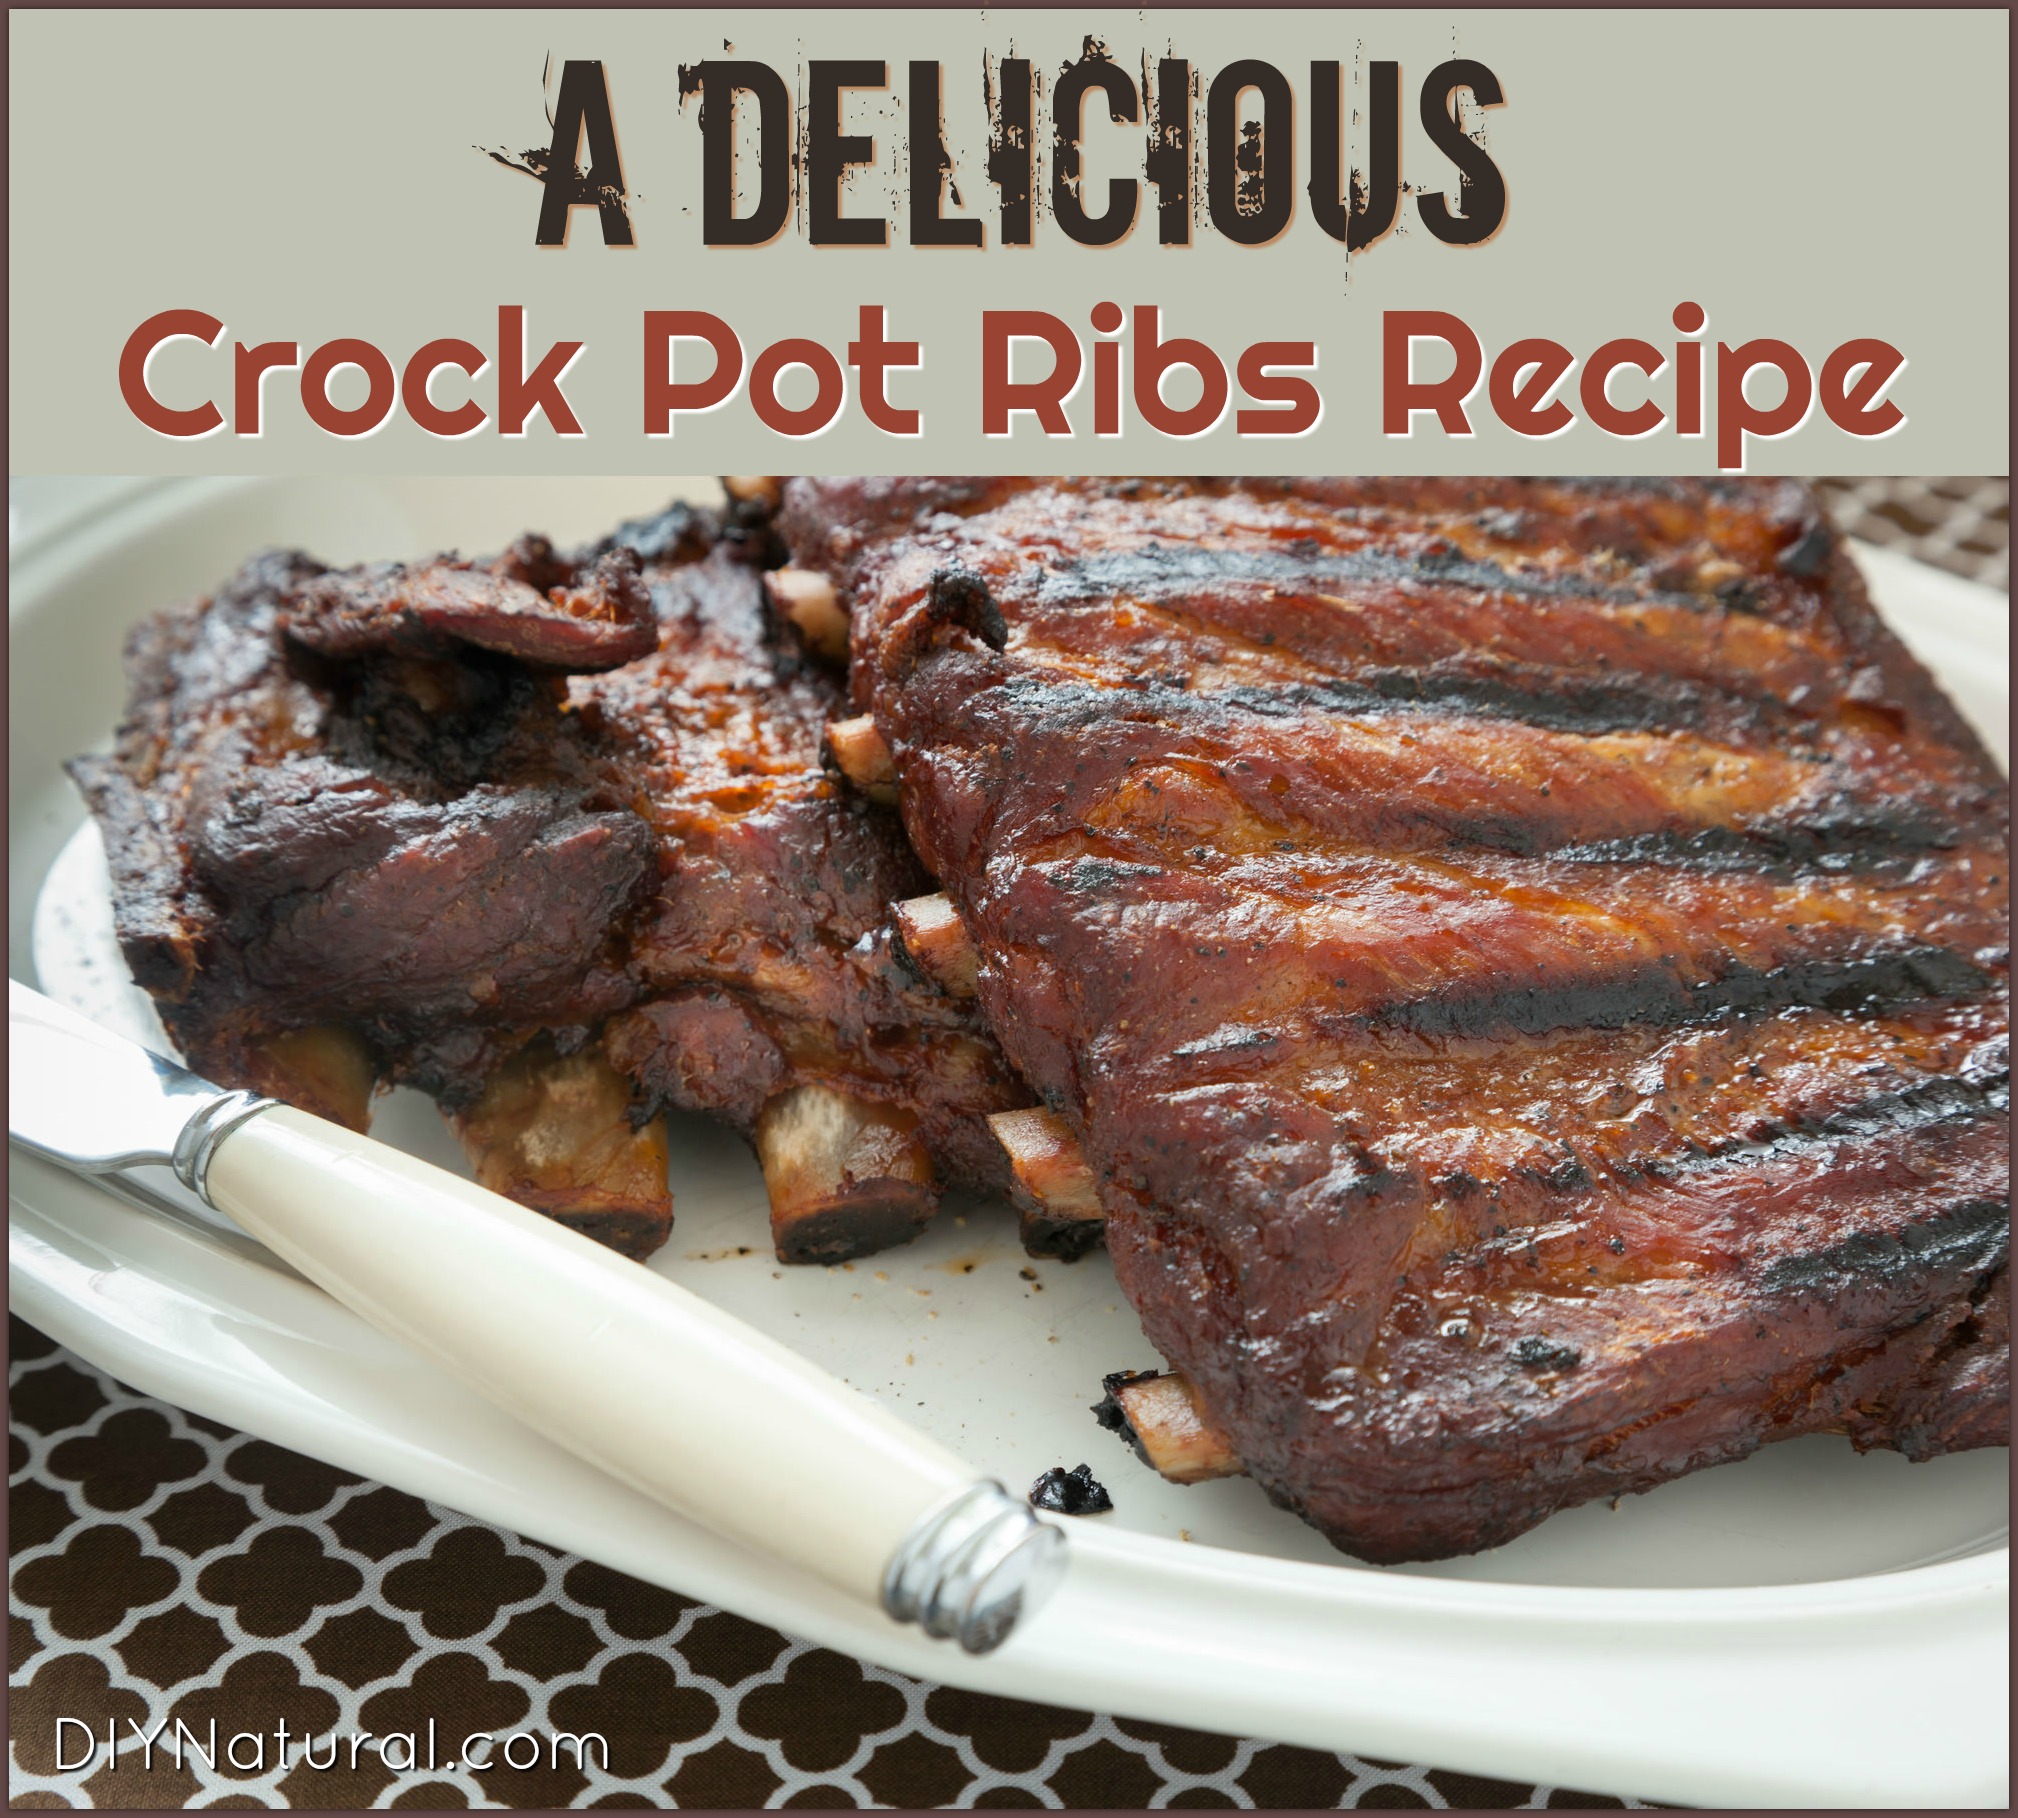 Crock Pot Ribs: Learn How to Make the Best Slow Cooker Ribs